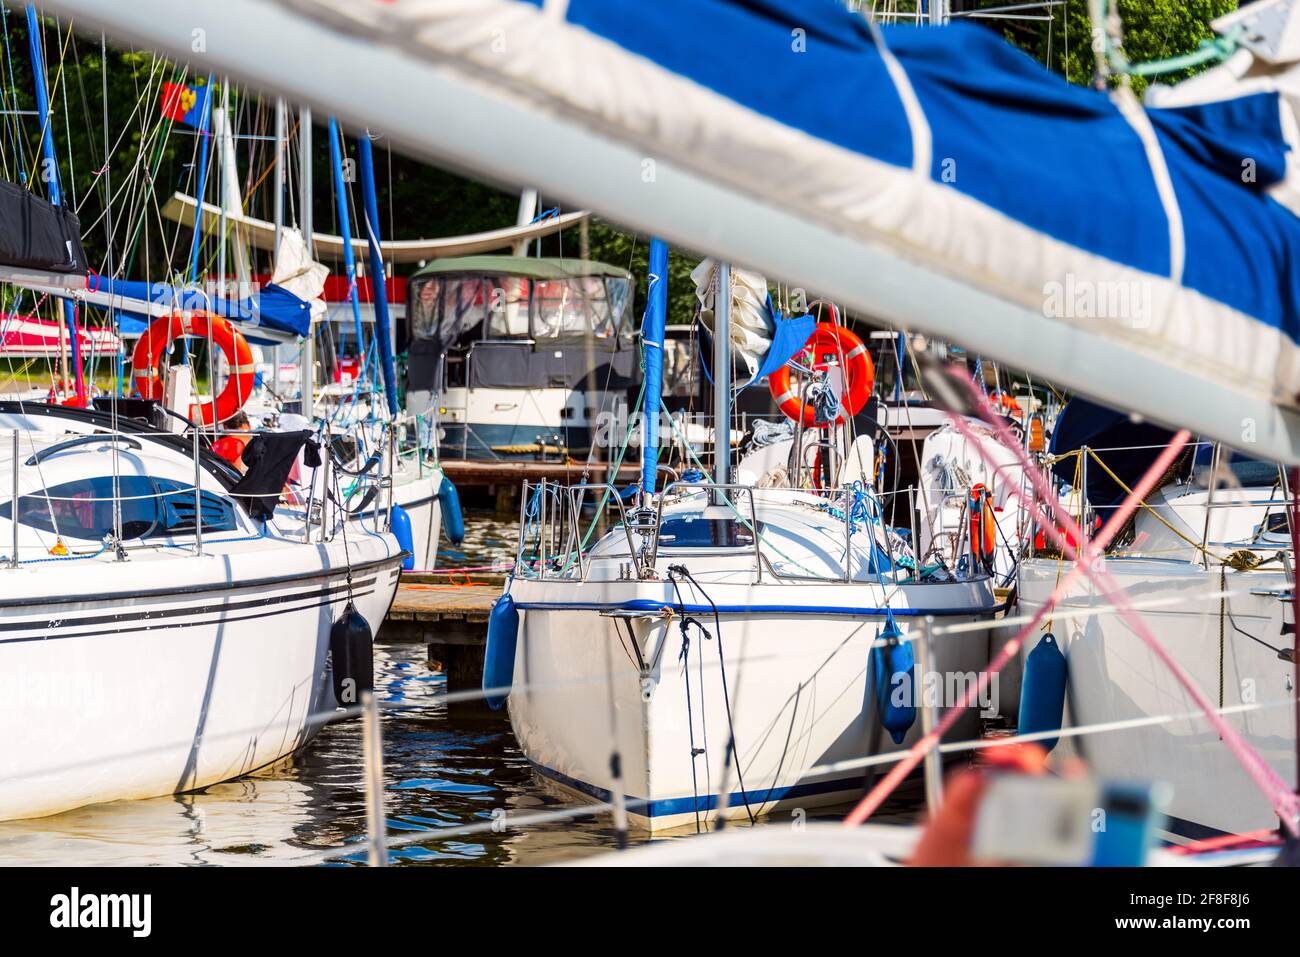 Yachts moored in a harbor. Sailboats in the dock. Summer vacations, cruise, recreation, sport, regatta, leisure activity, service, tourism Stock Photo